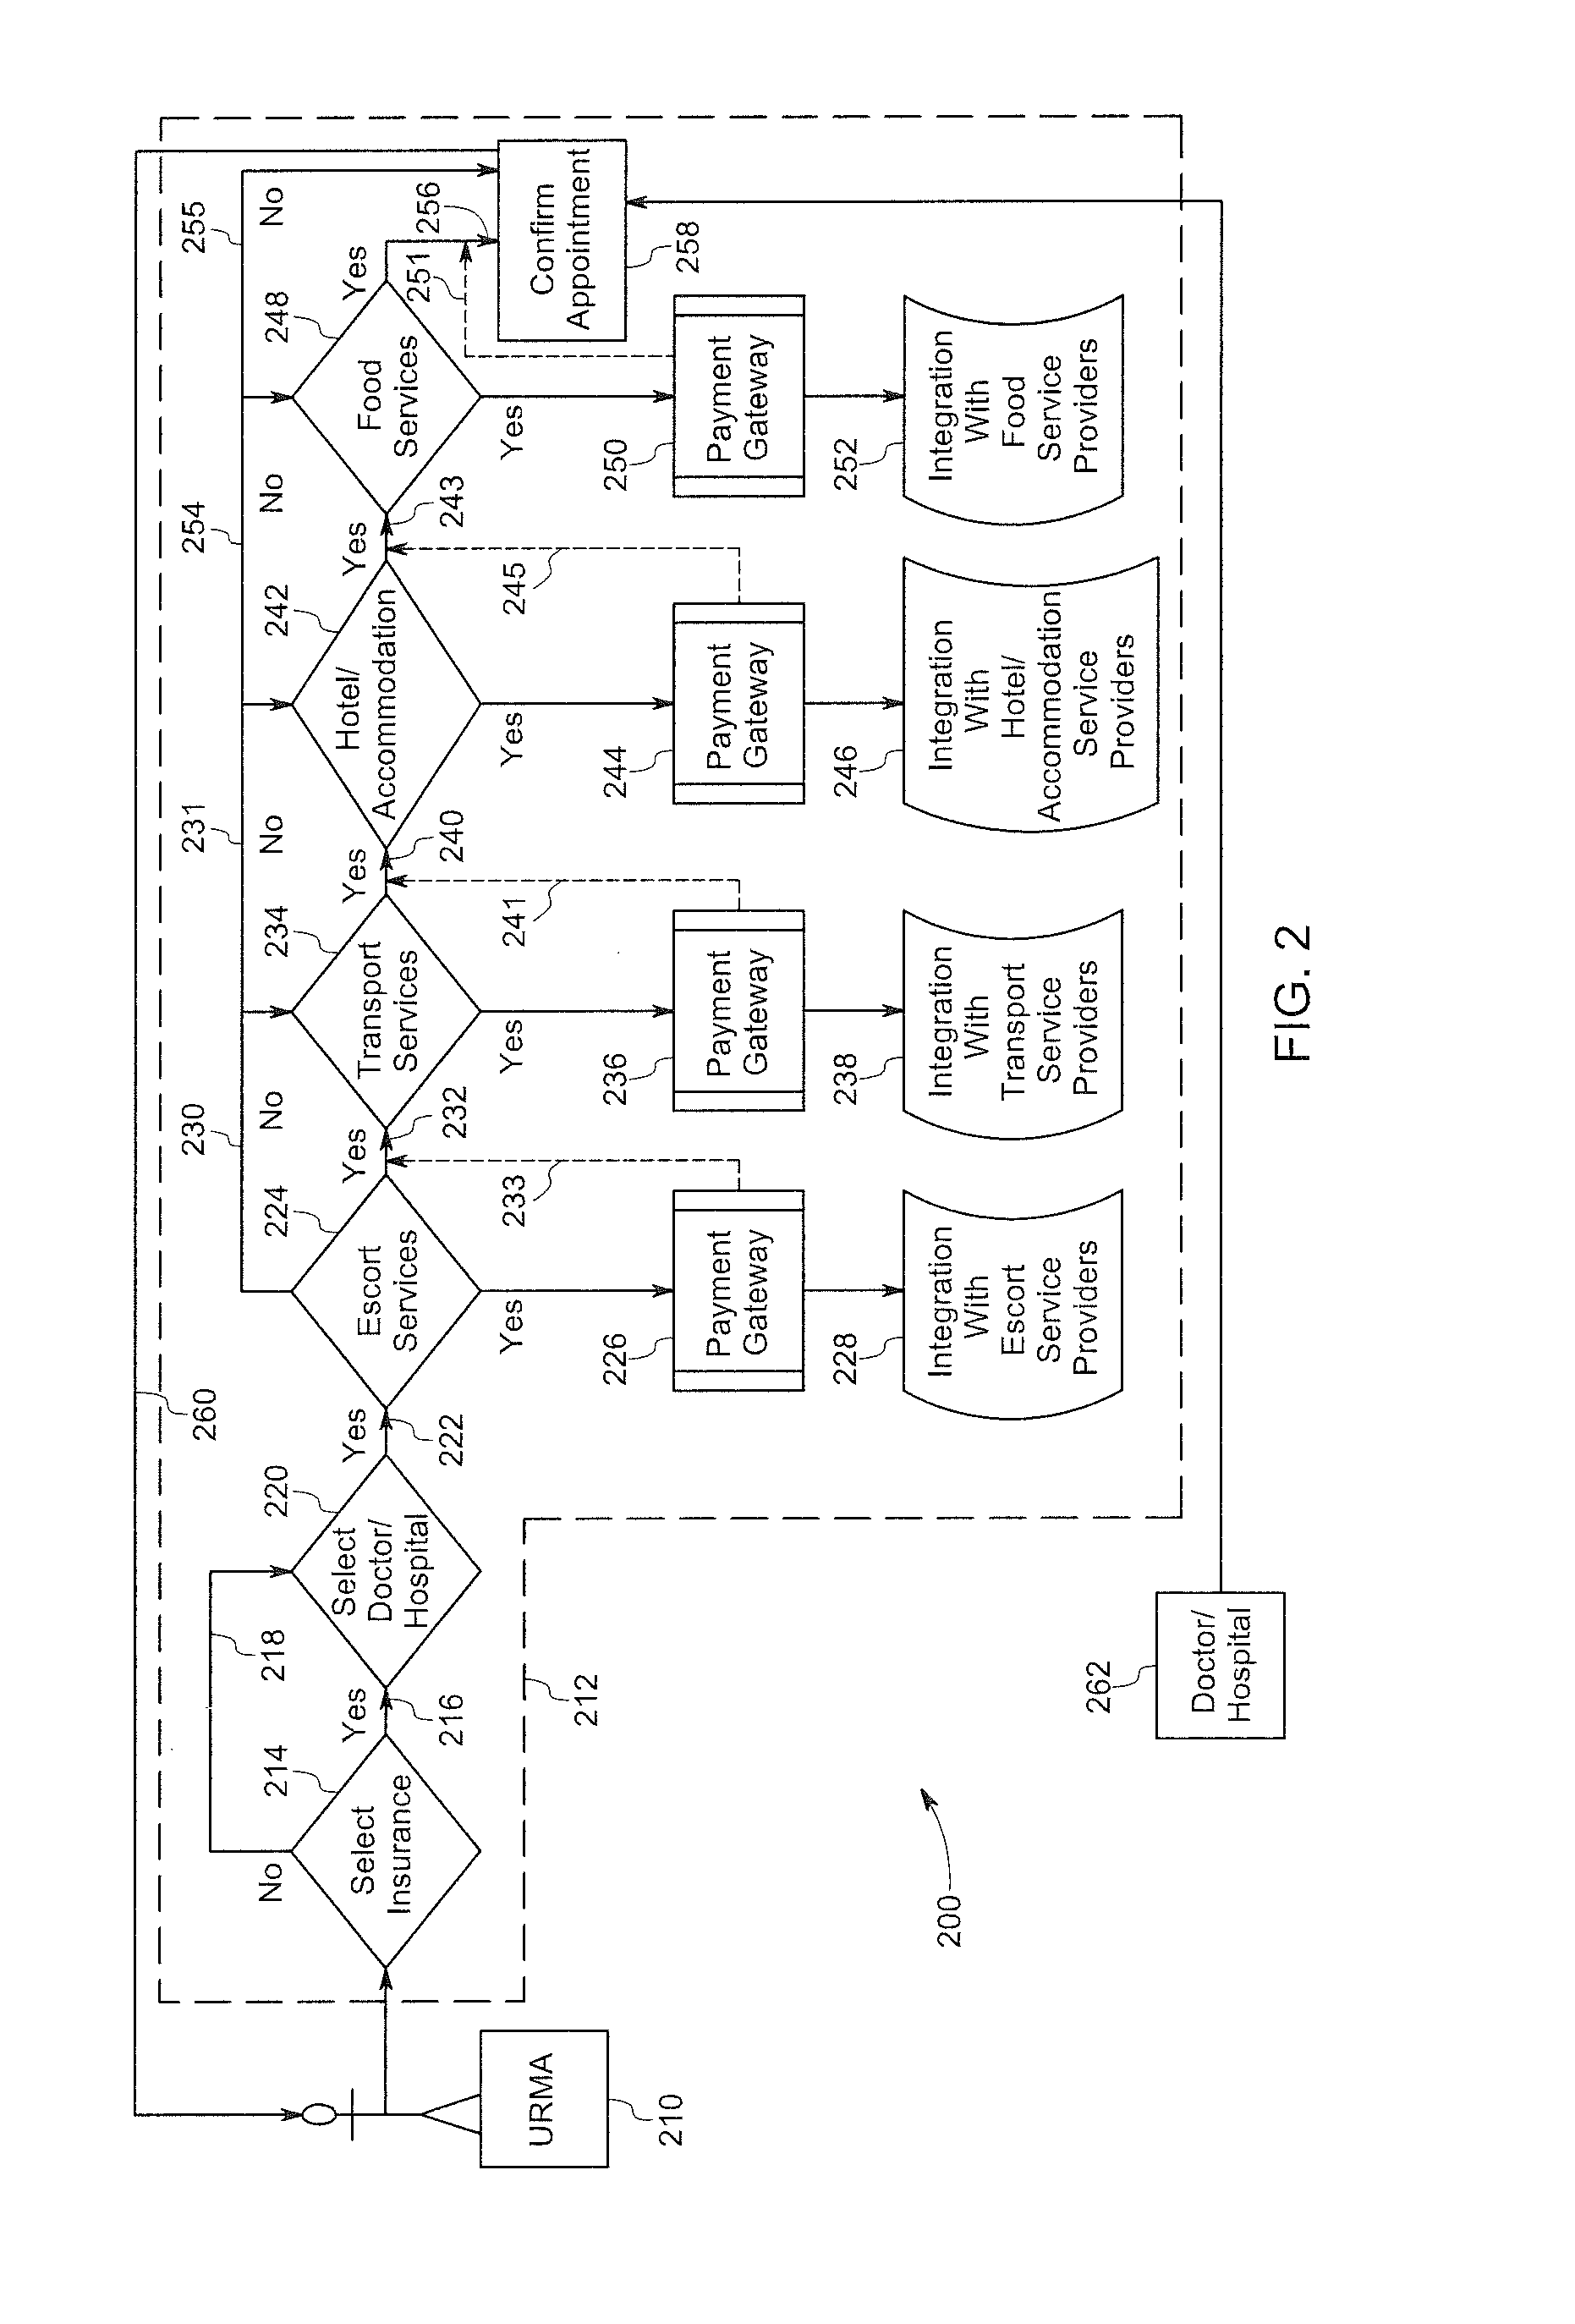 System and method for health care management